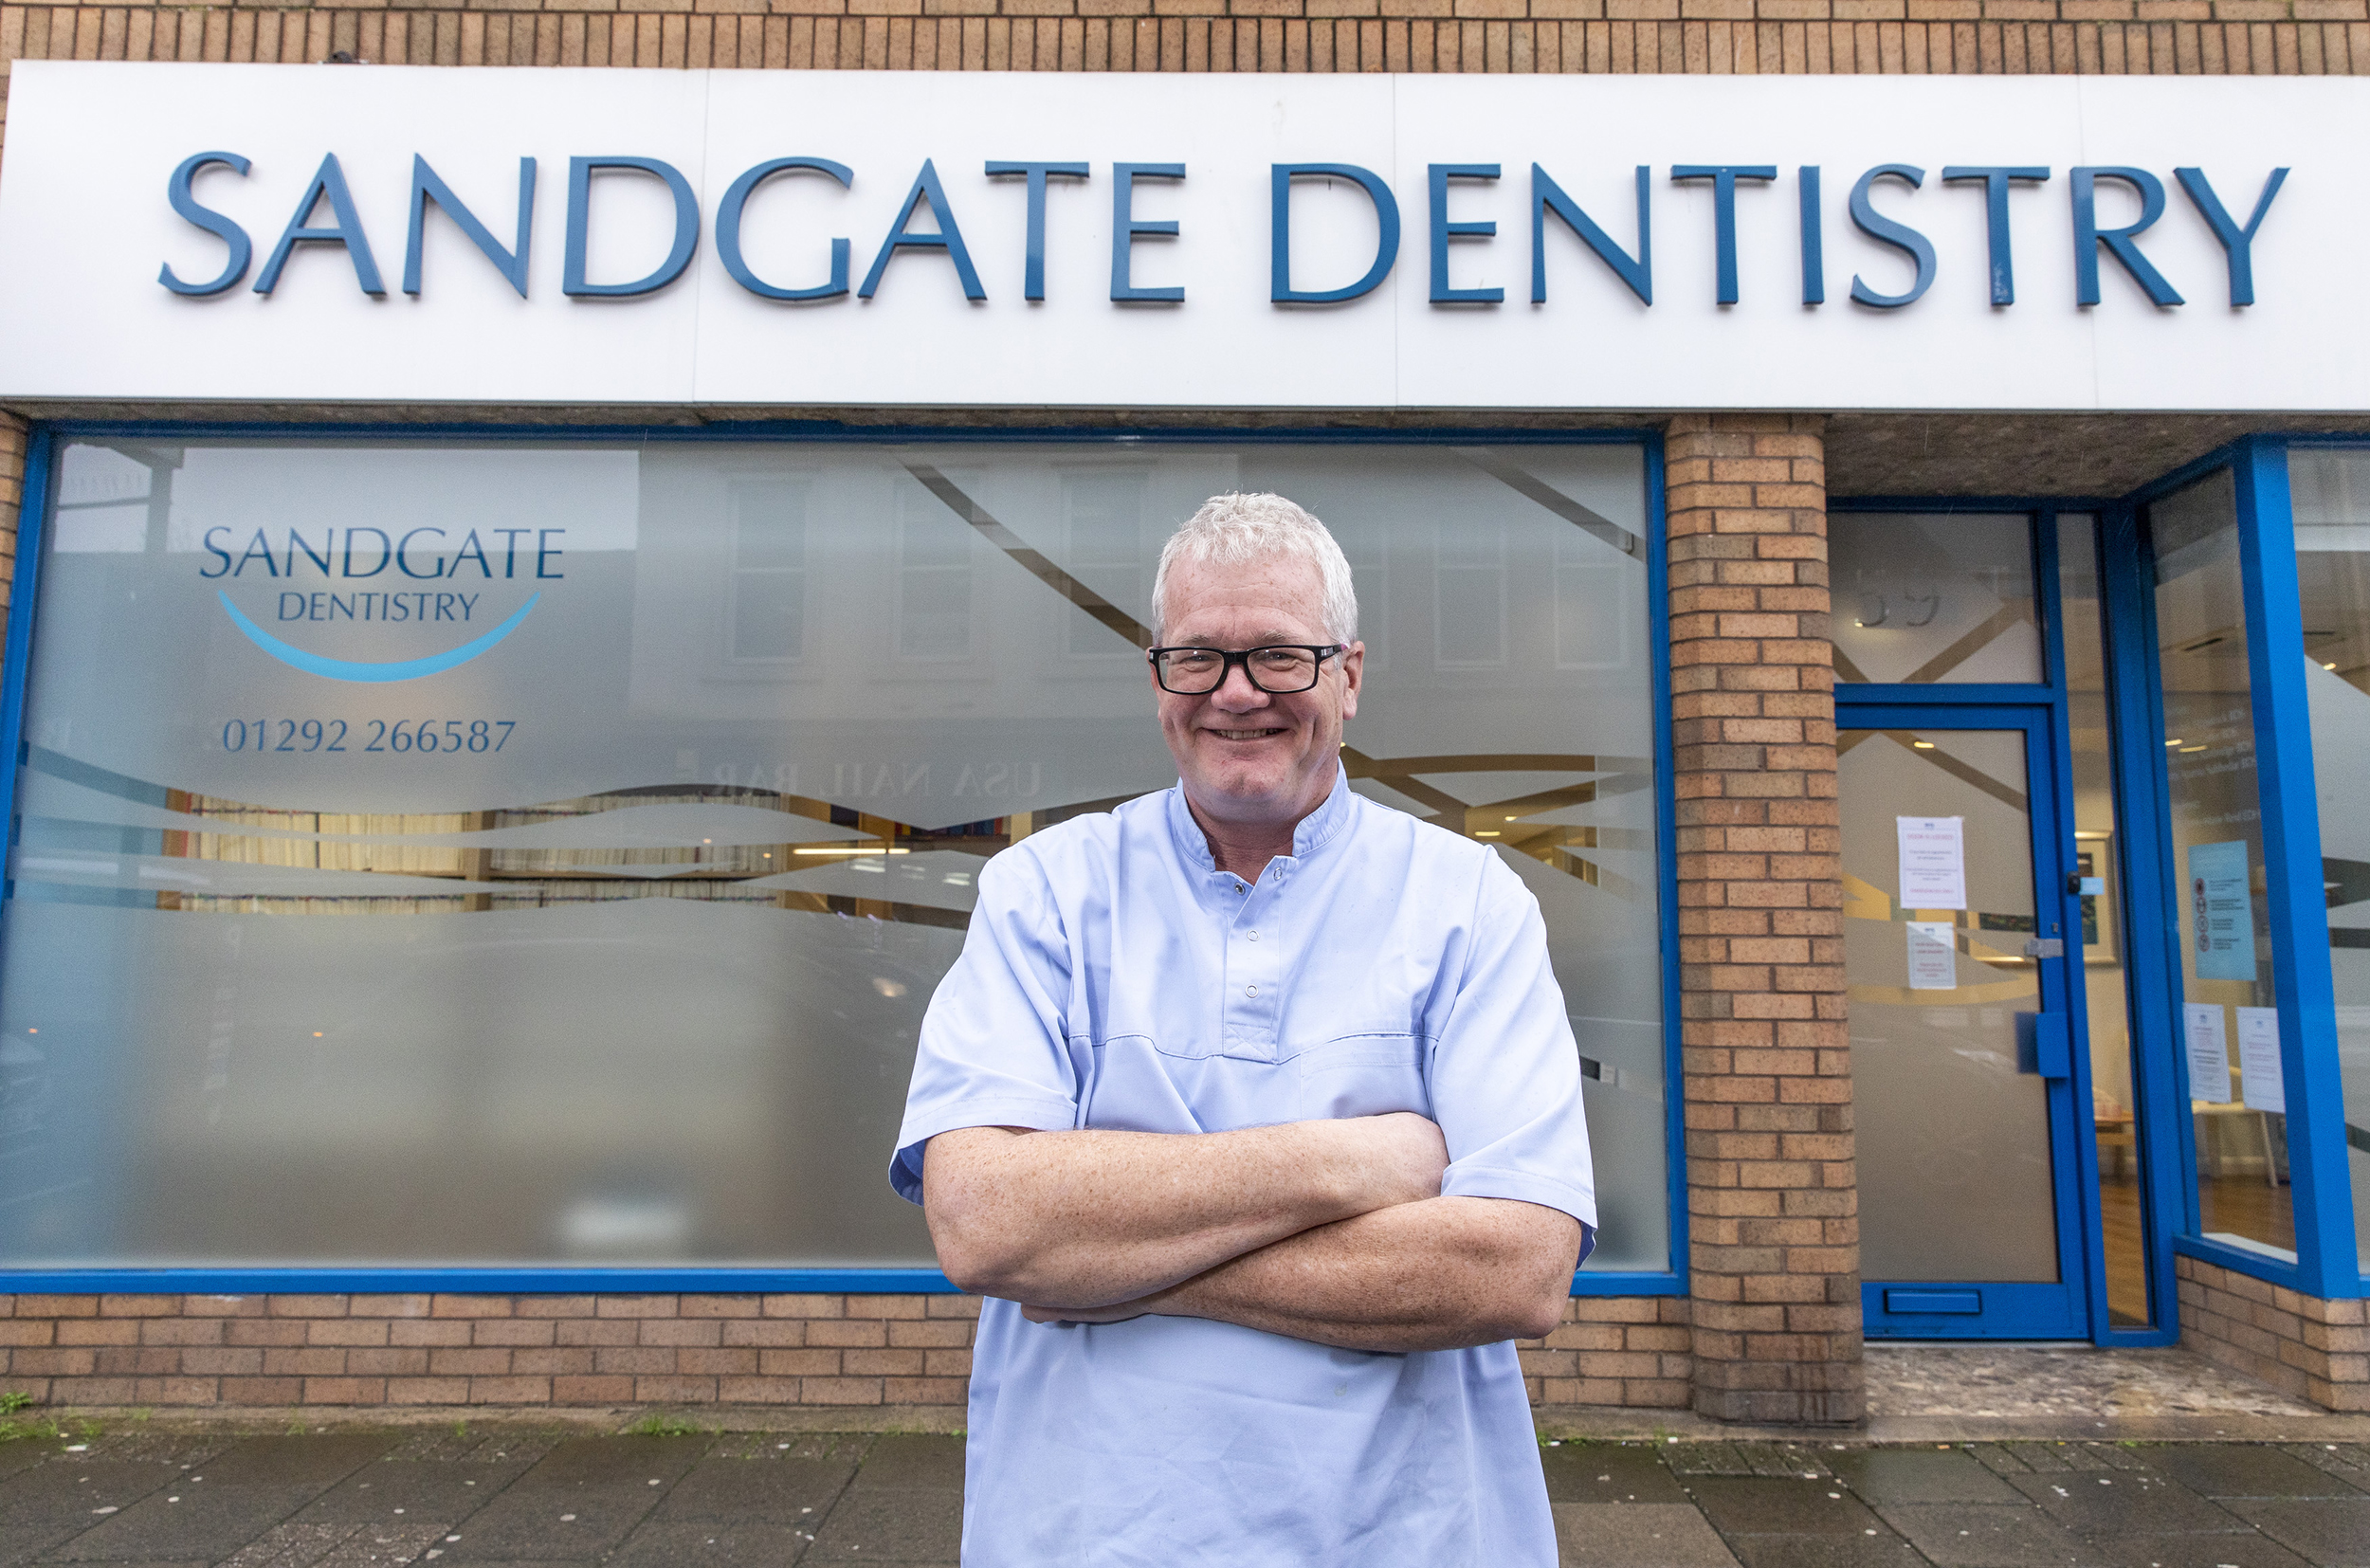 Clyde Munro acquires Sandgate Dentistry